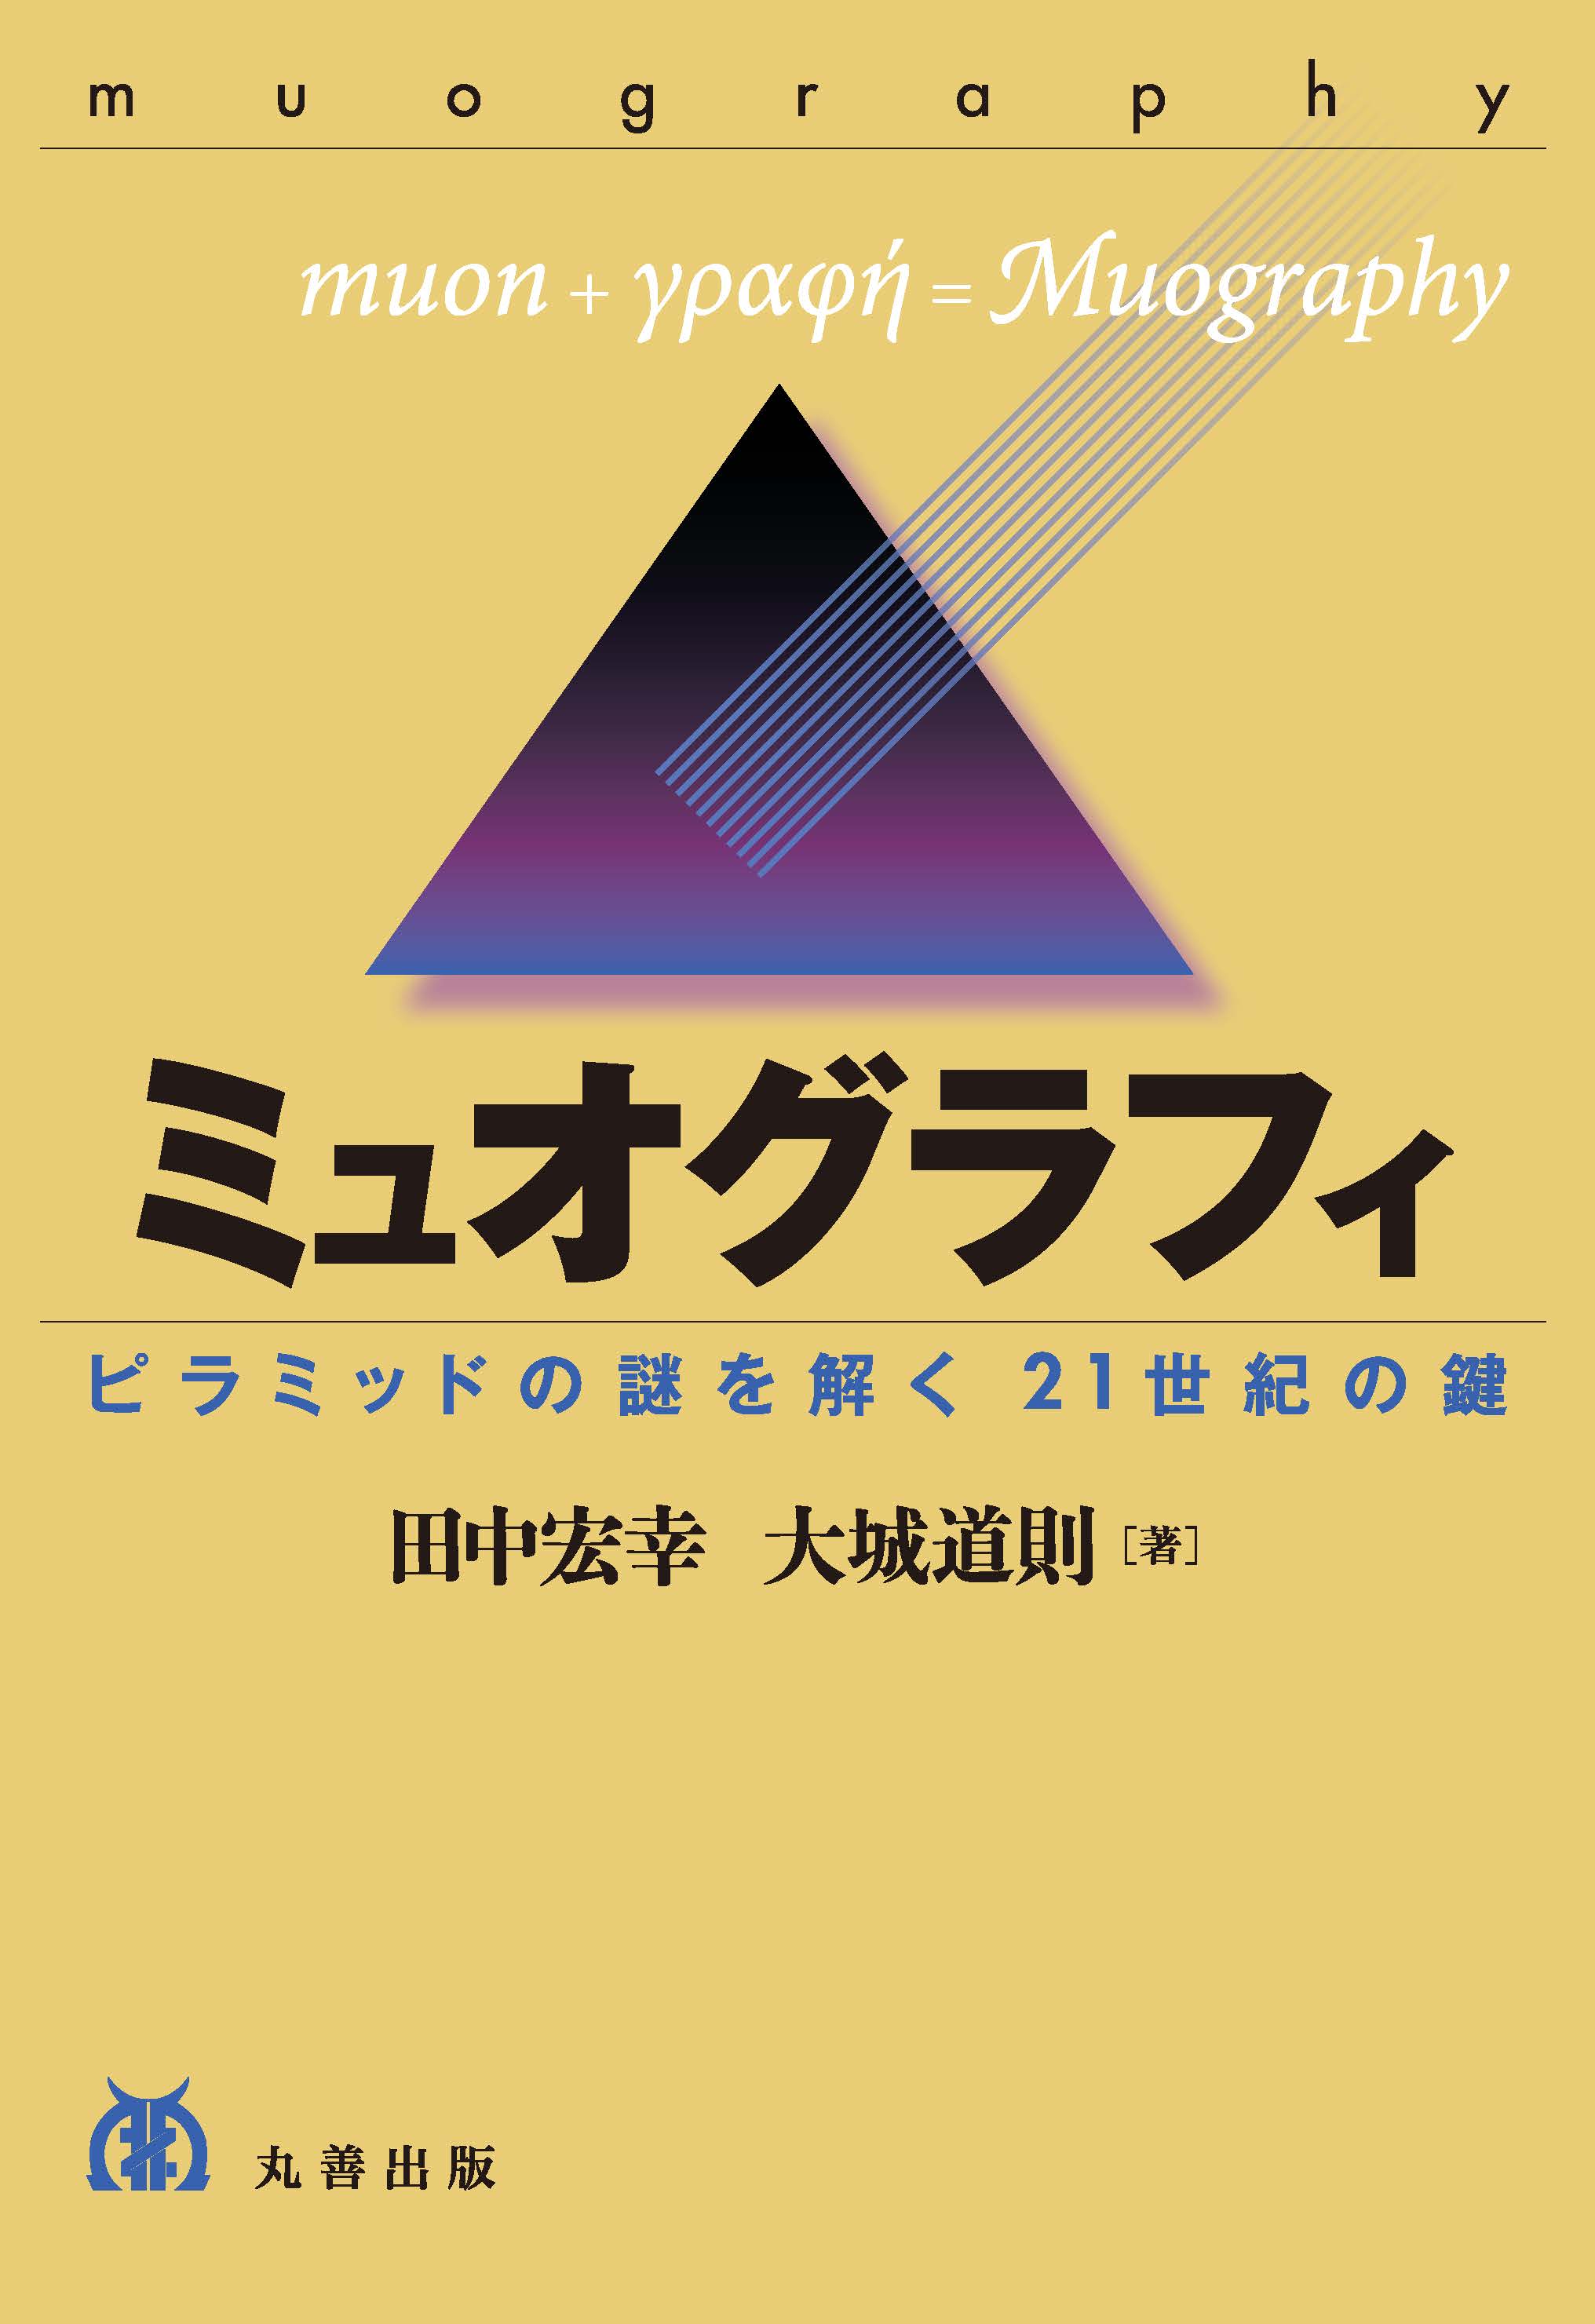 Pyramid triangle illustration on a bright yellow cover